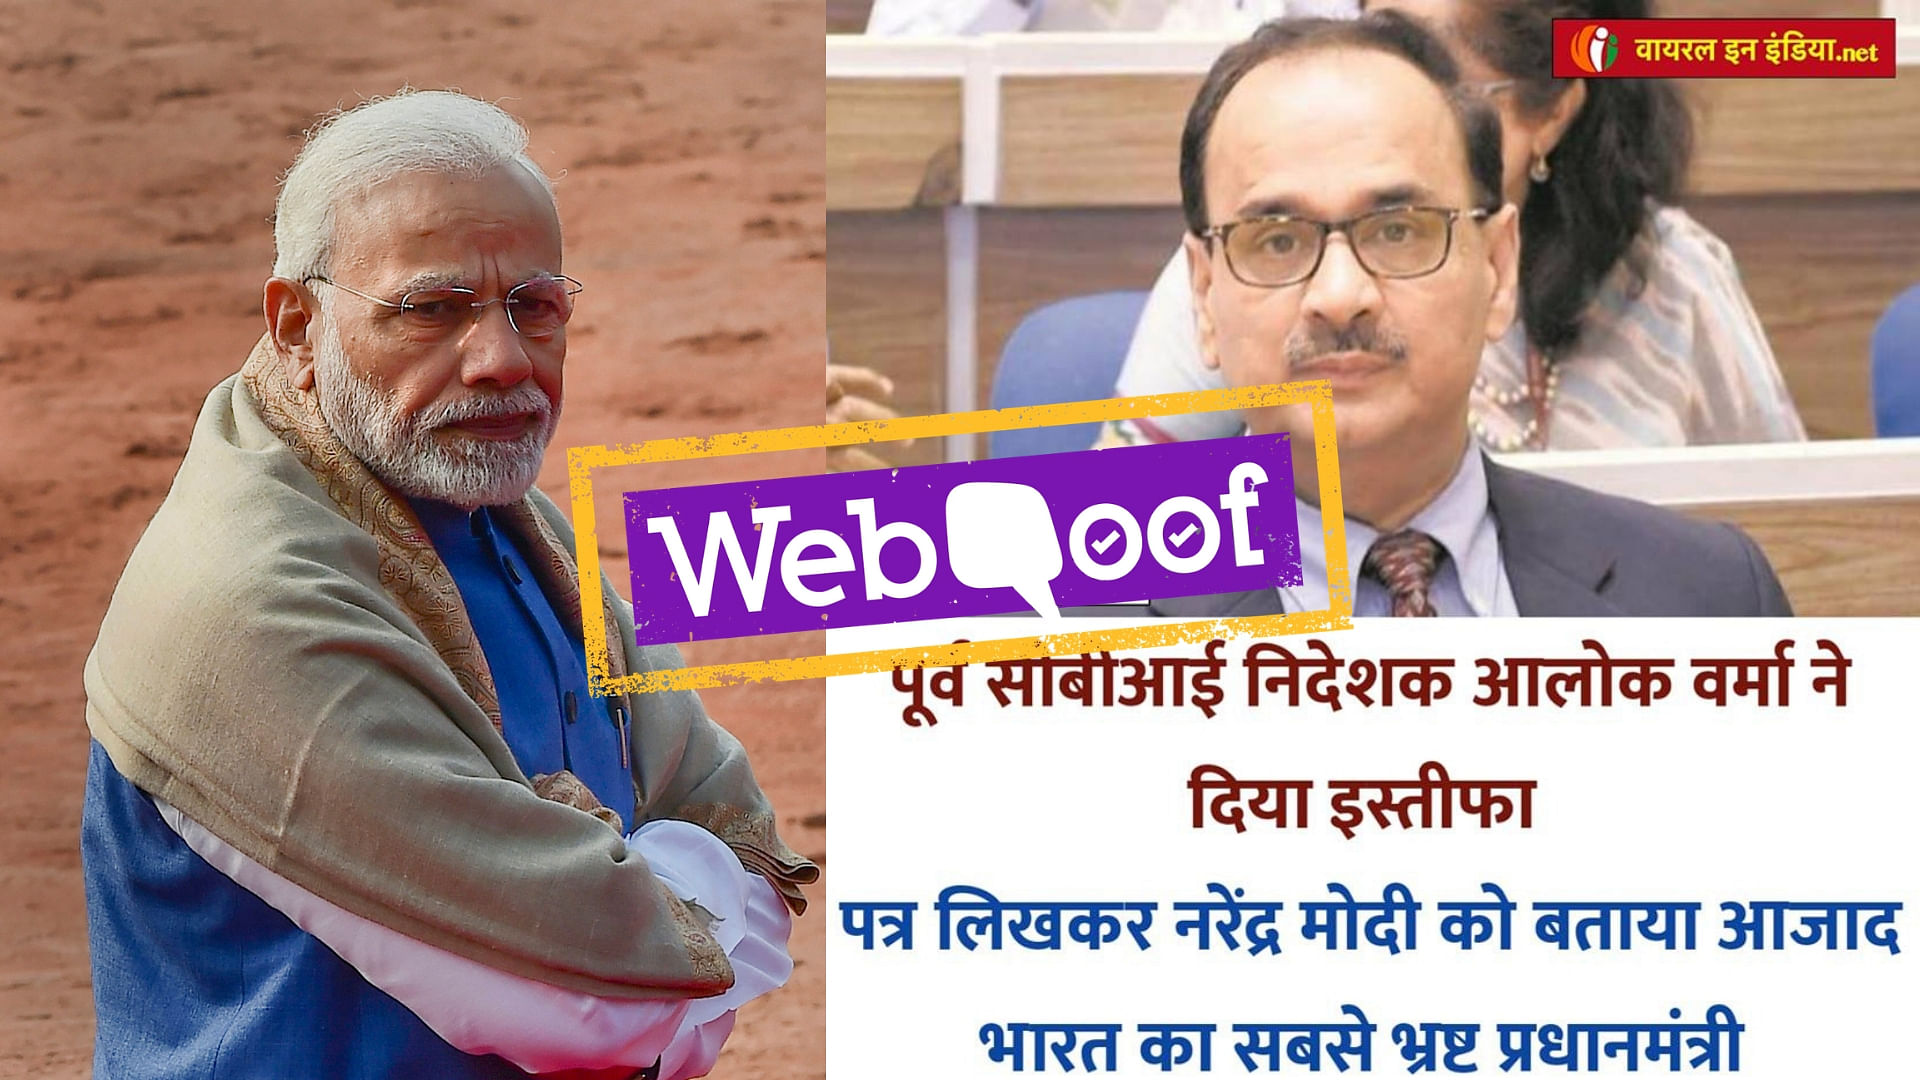 A viral post claimed that Alok Verma had called Narendra Modi, “the most corrupt prime minister of independent India.”